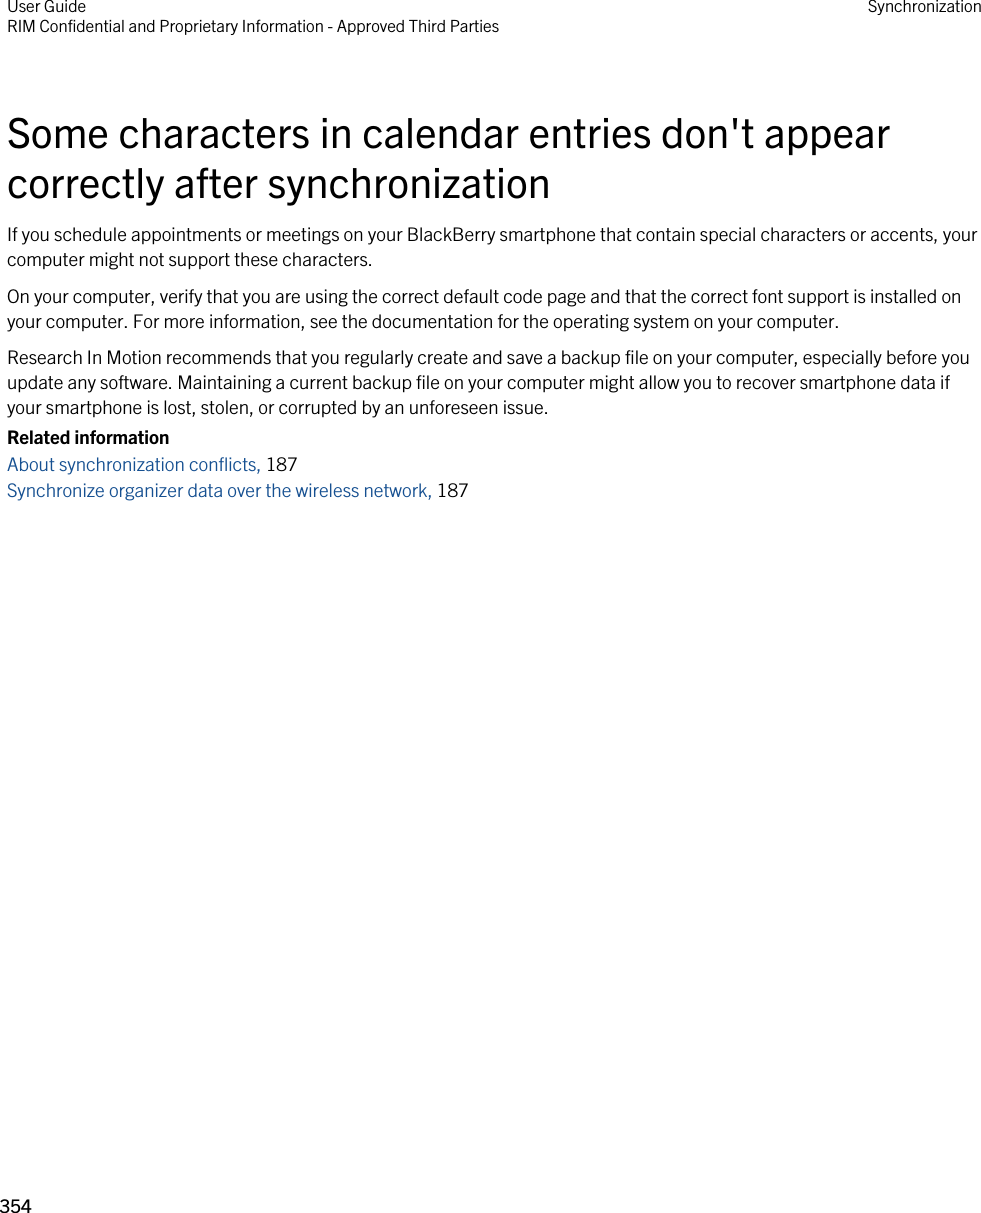 Some characters in calendar entries don&apos;t appear correctly after synchronizationIf you schedule appointments or meetings on your BlackBerry smartphone that contain special characters or accents, your computer might not support these characters.On your computer, verify that you are using the correct default code page and that the correct font support is installed on your computer. For more information, see the documentation for the operating system on your computer.Research In Motion recommends that you regularly create and save a backup file on your computer, especially before you update any software. Maintaining a current backup file on your computer might allow you to recover smartphone data if your smartphone is lost, stolen, or corrupted by an unforeseen issue.Related informationAbout synchronization conflicts, 187 Synchronize organizer data over the wireless network, 187 User GuideRIM Confidential and Proprietary Information - Approved Third Parties Synchronization354 